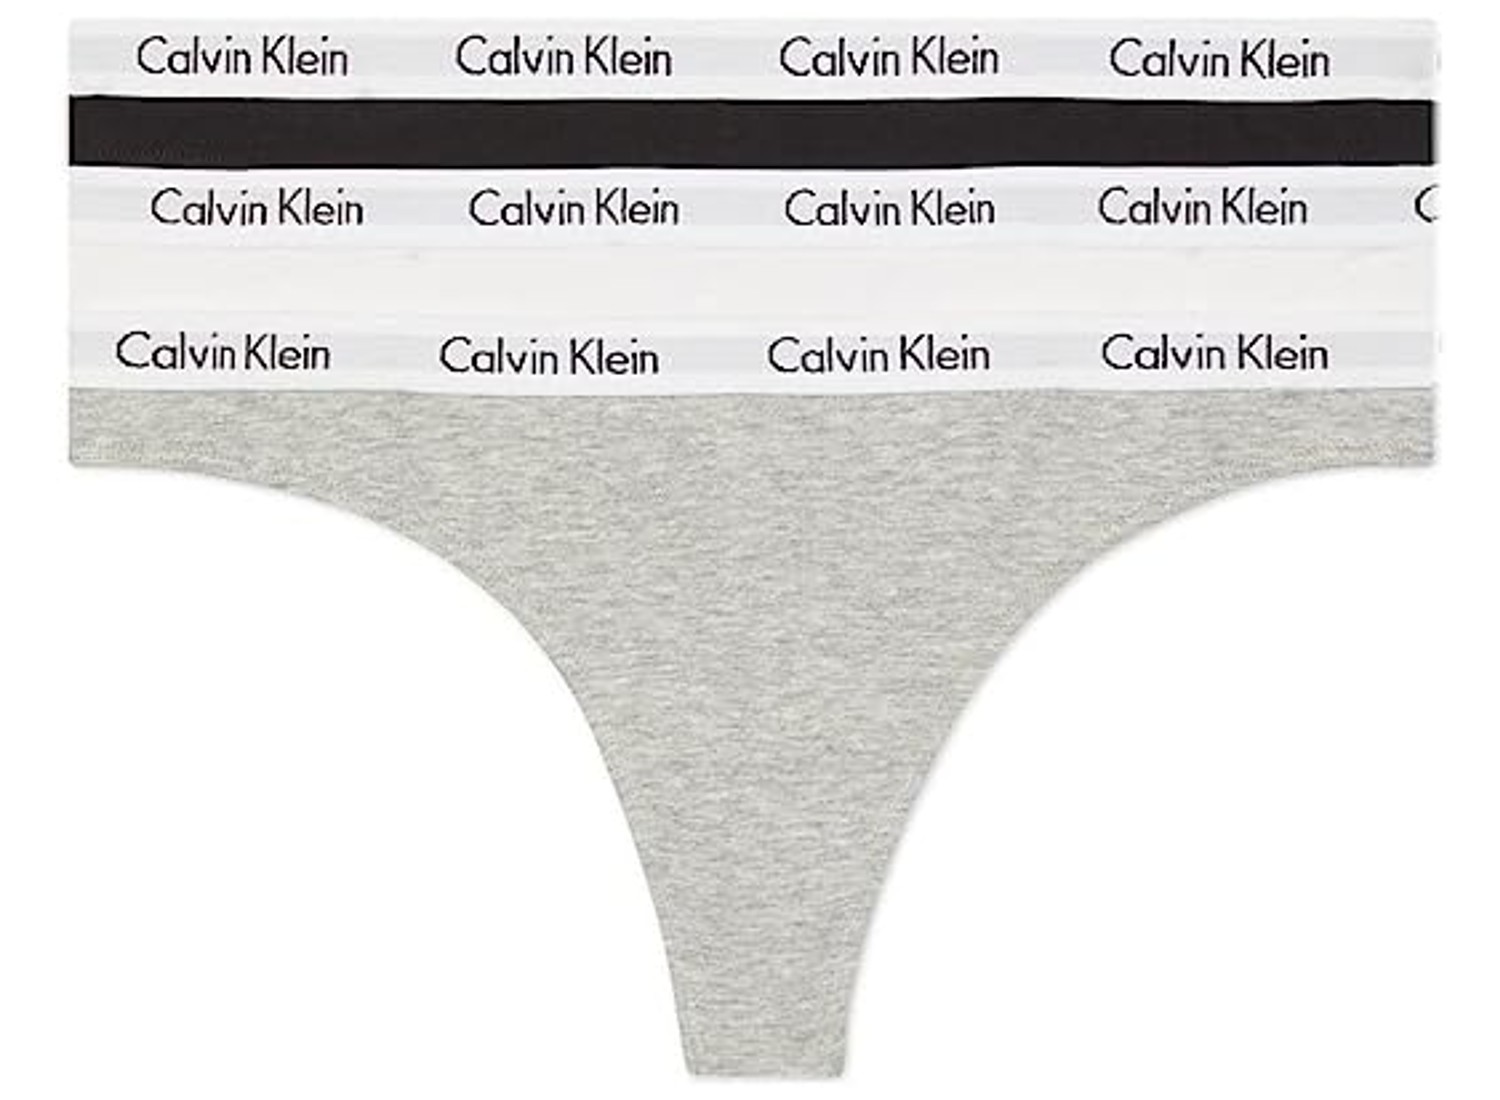 Save up to 60% on Calvin Klein Underwear This Prime Day – Hollywood Life